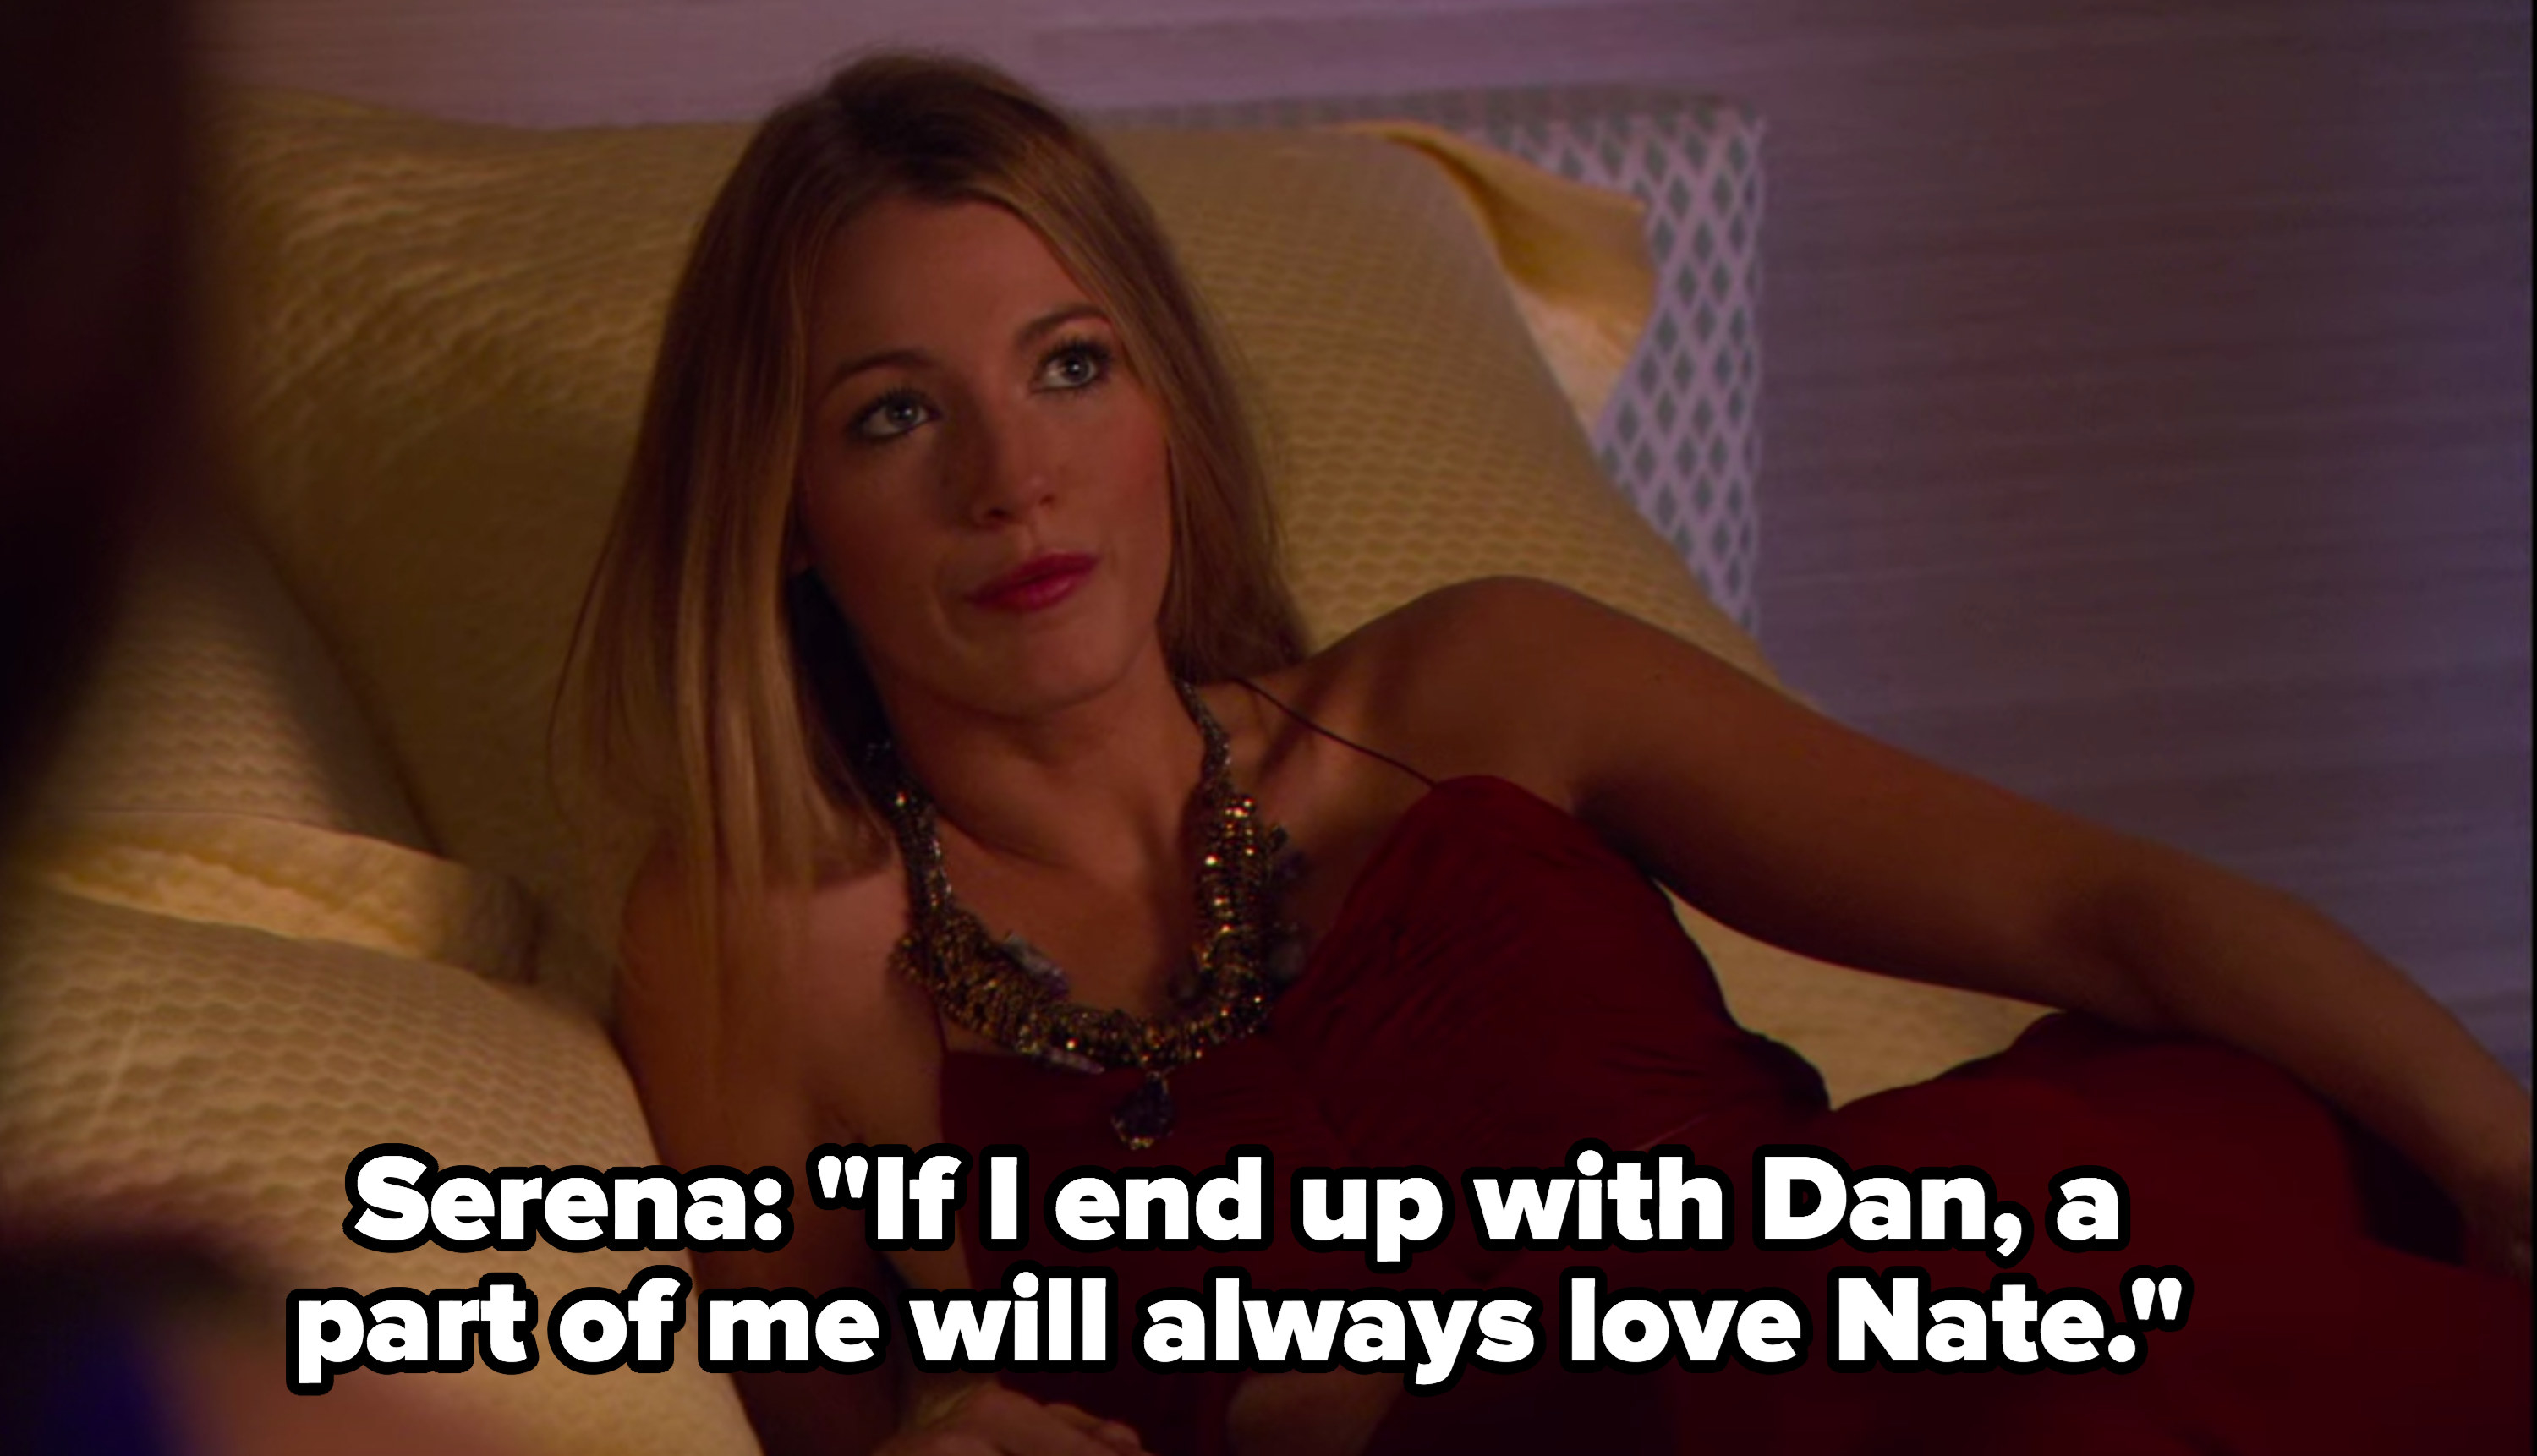 Serena: &quot;If I end up with Dan, a part of me will always love Nate&quot;